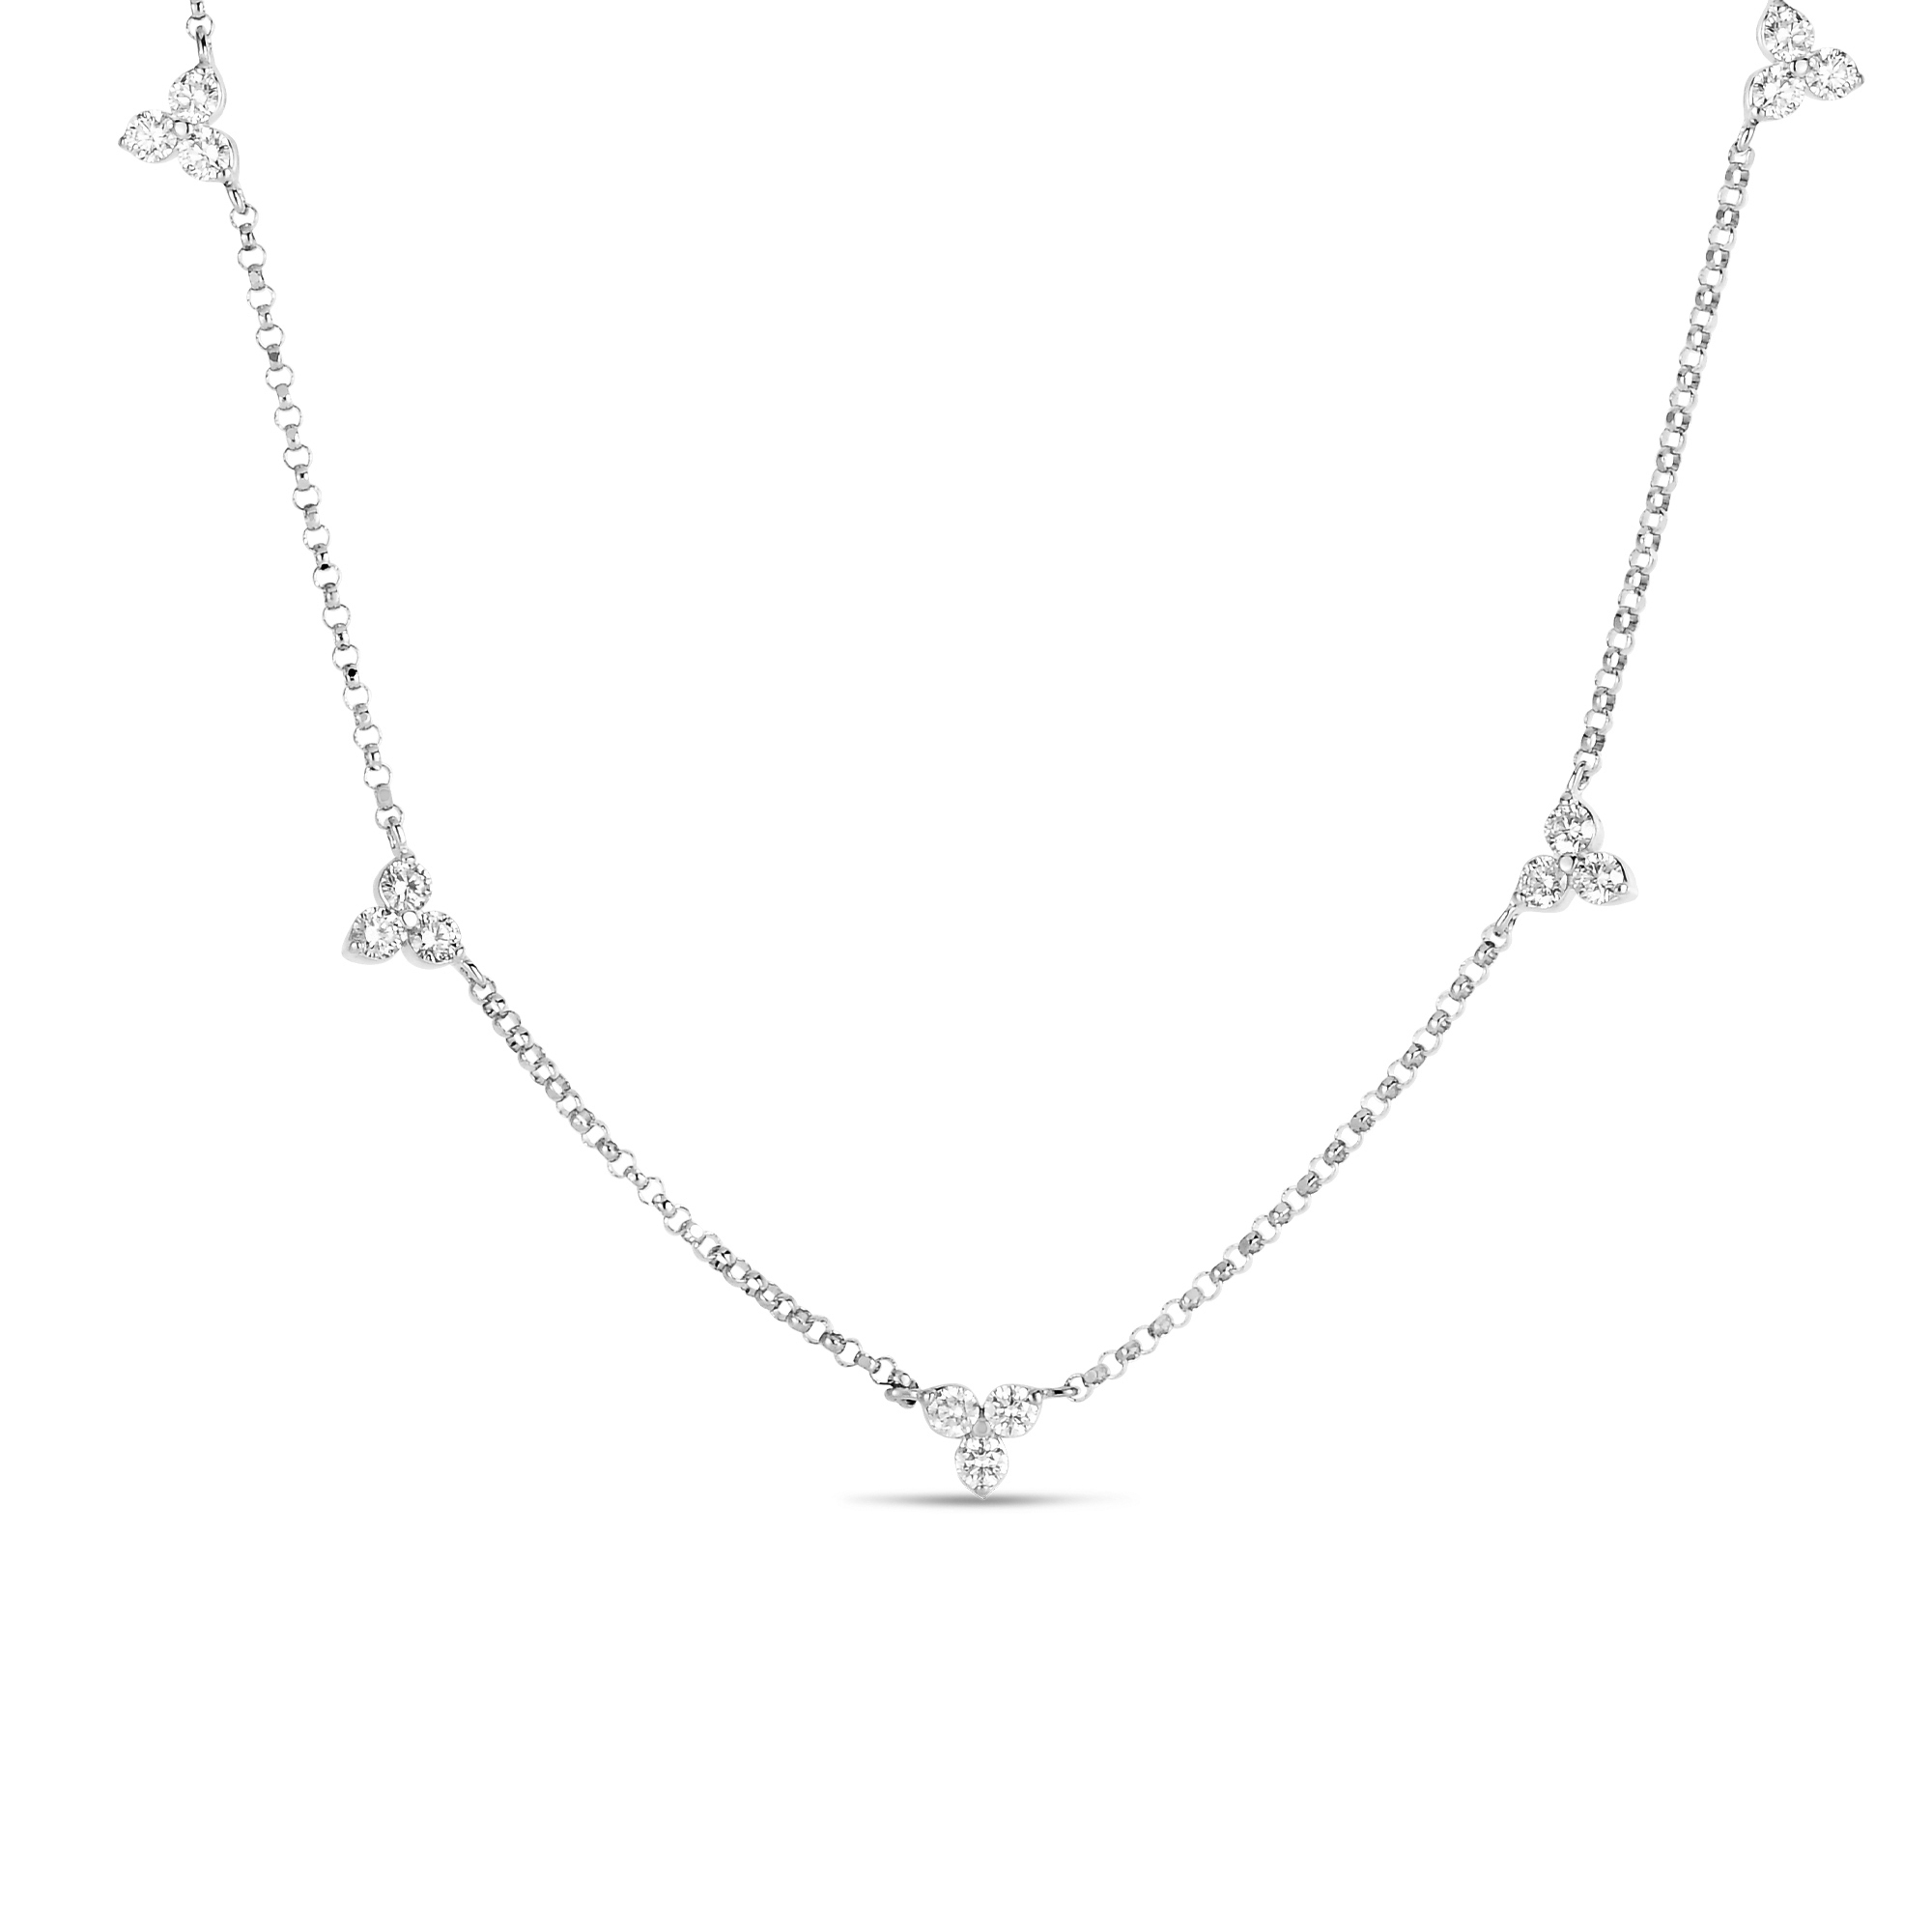 Roberto Coin 18K White Gold Diamonds by the Inch 5 Station Flower Necklace